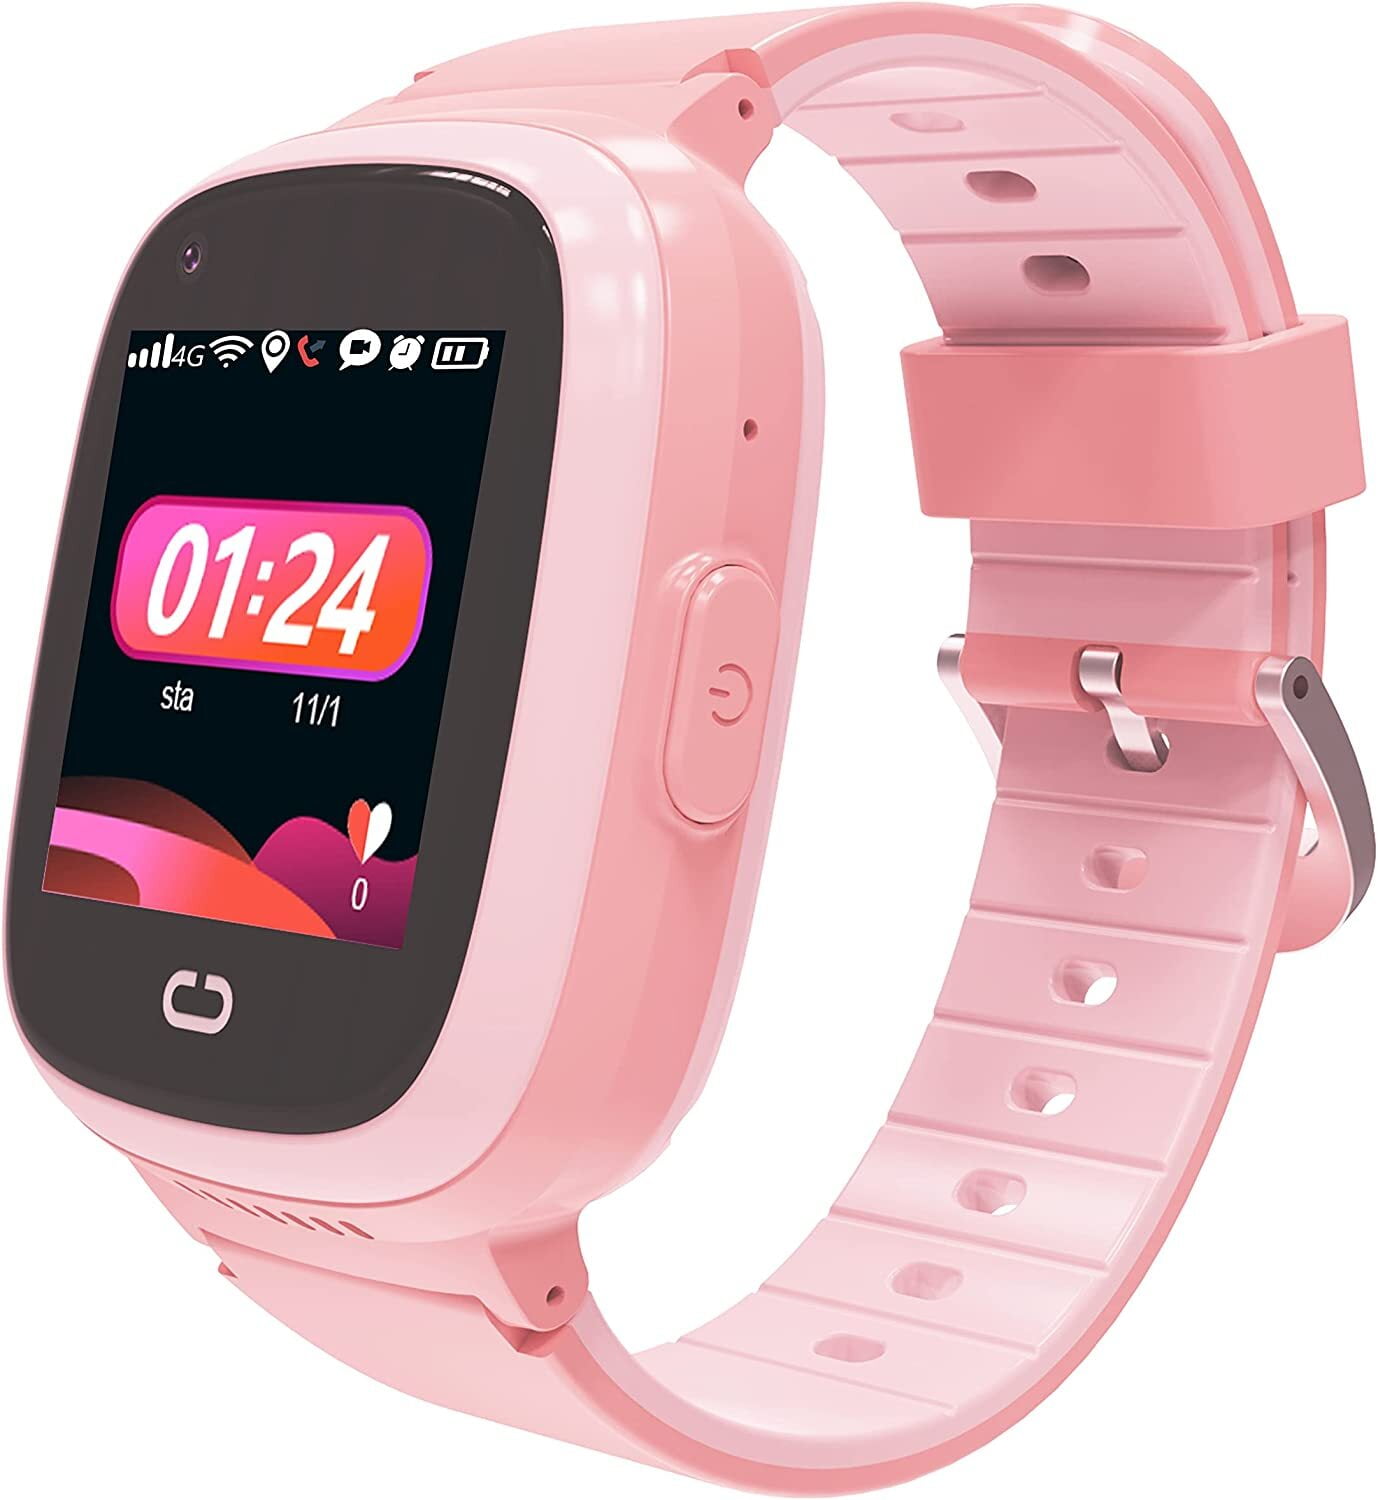 PTHTECHUS Kids Smartwatch with GPS 4G HD Touchscreen Watch with Phone GPS Tracker Real-Time Location SOS Video Call Voice Camera Waterproof Android and iOS for Boys Girls Gift Pink - Walmart.com